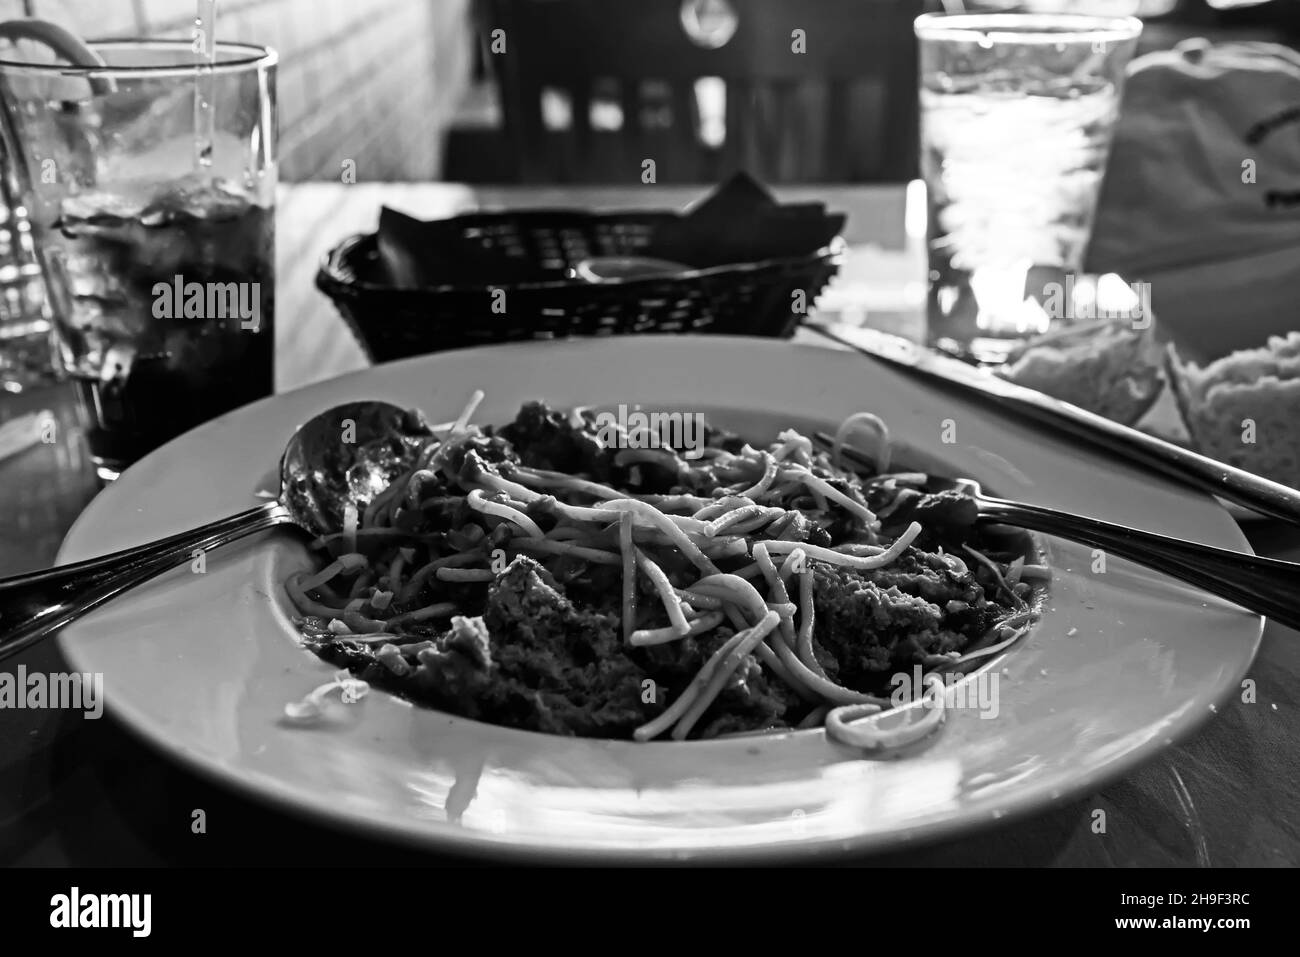 Black and white image of spaghetti on a white plate.  Lunchtime at a Italian restaurant. Stock Photo